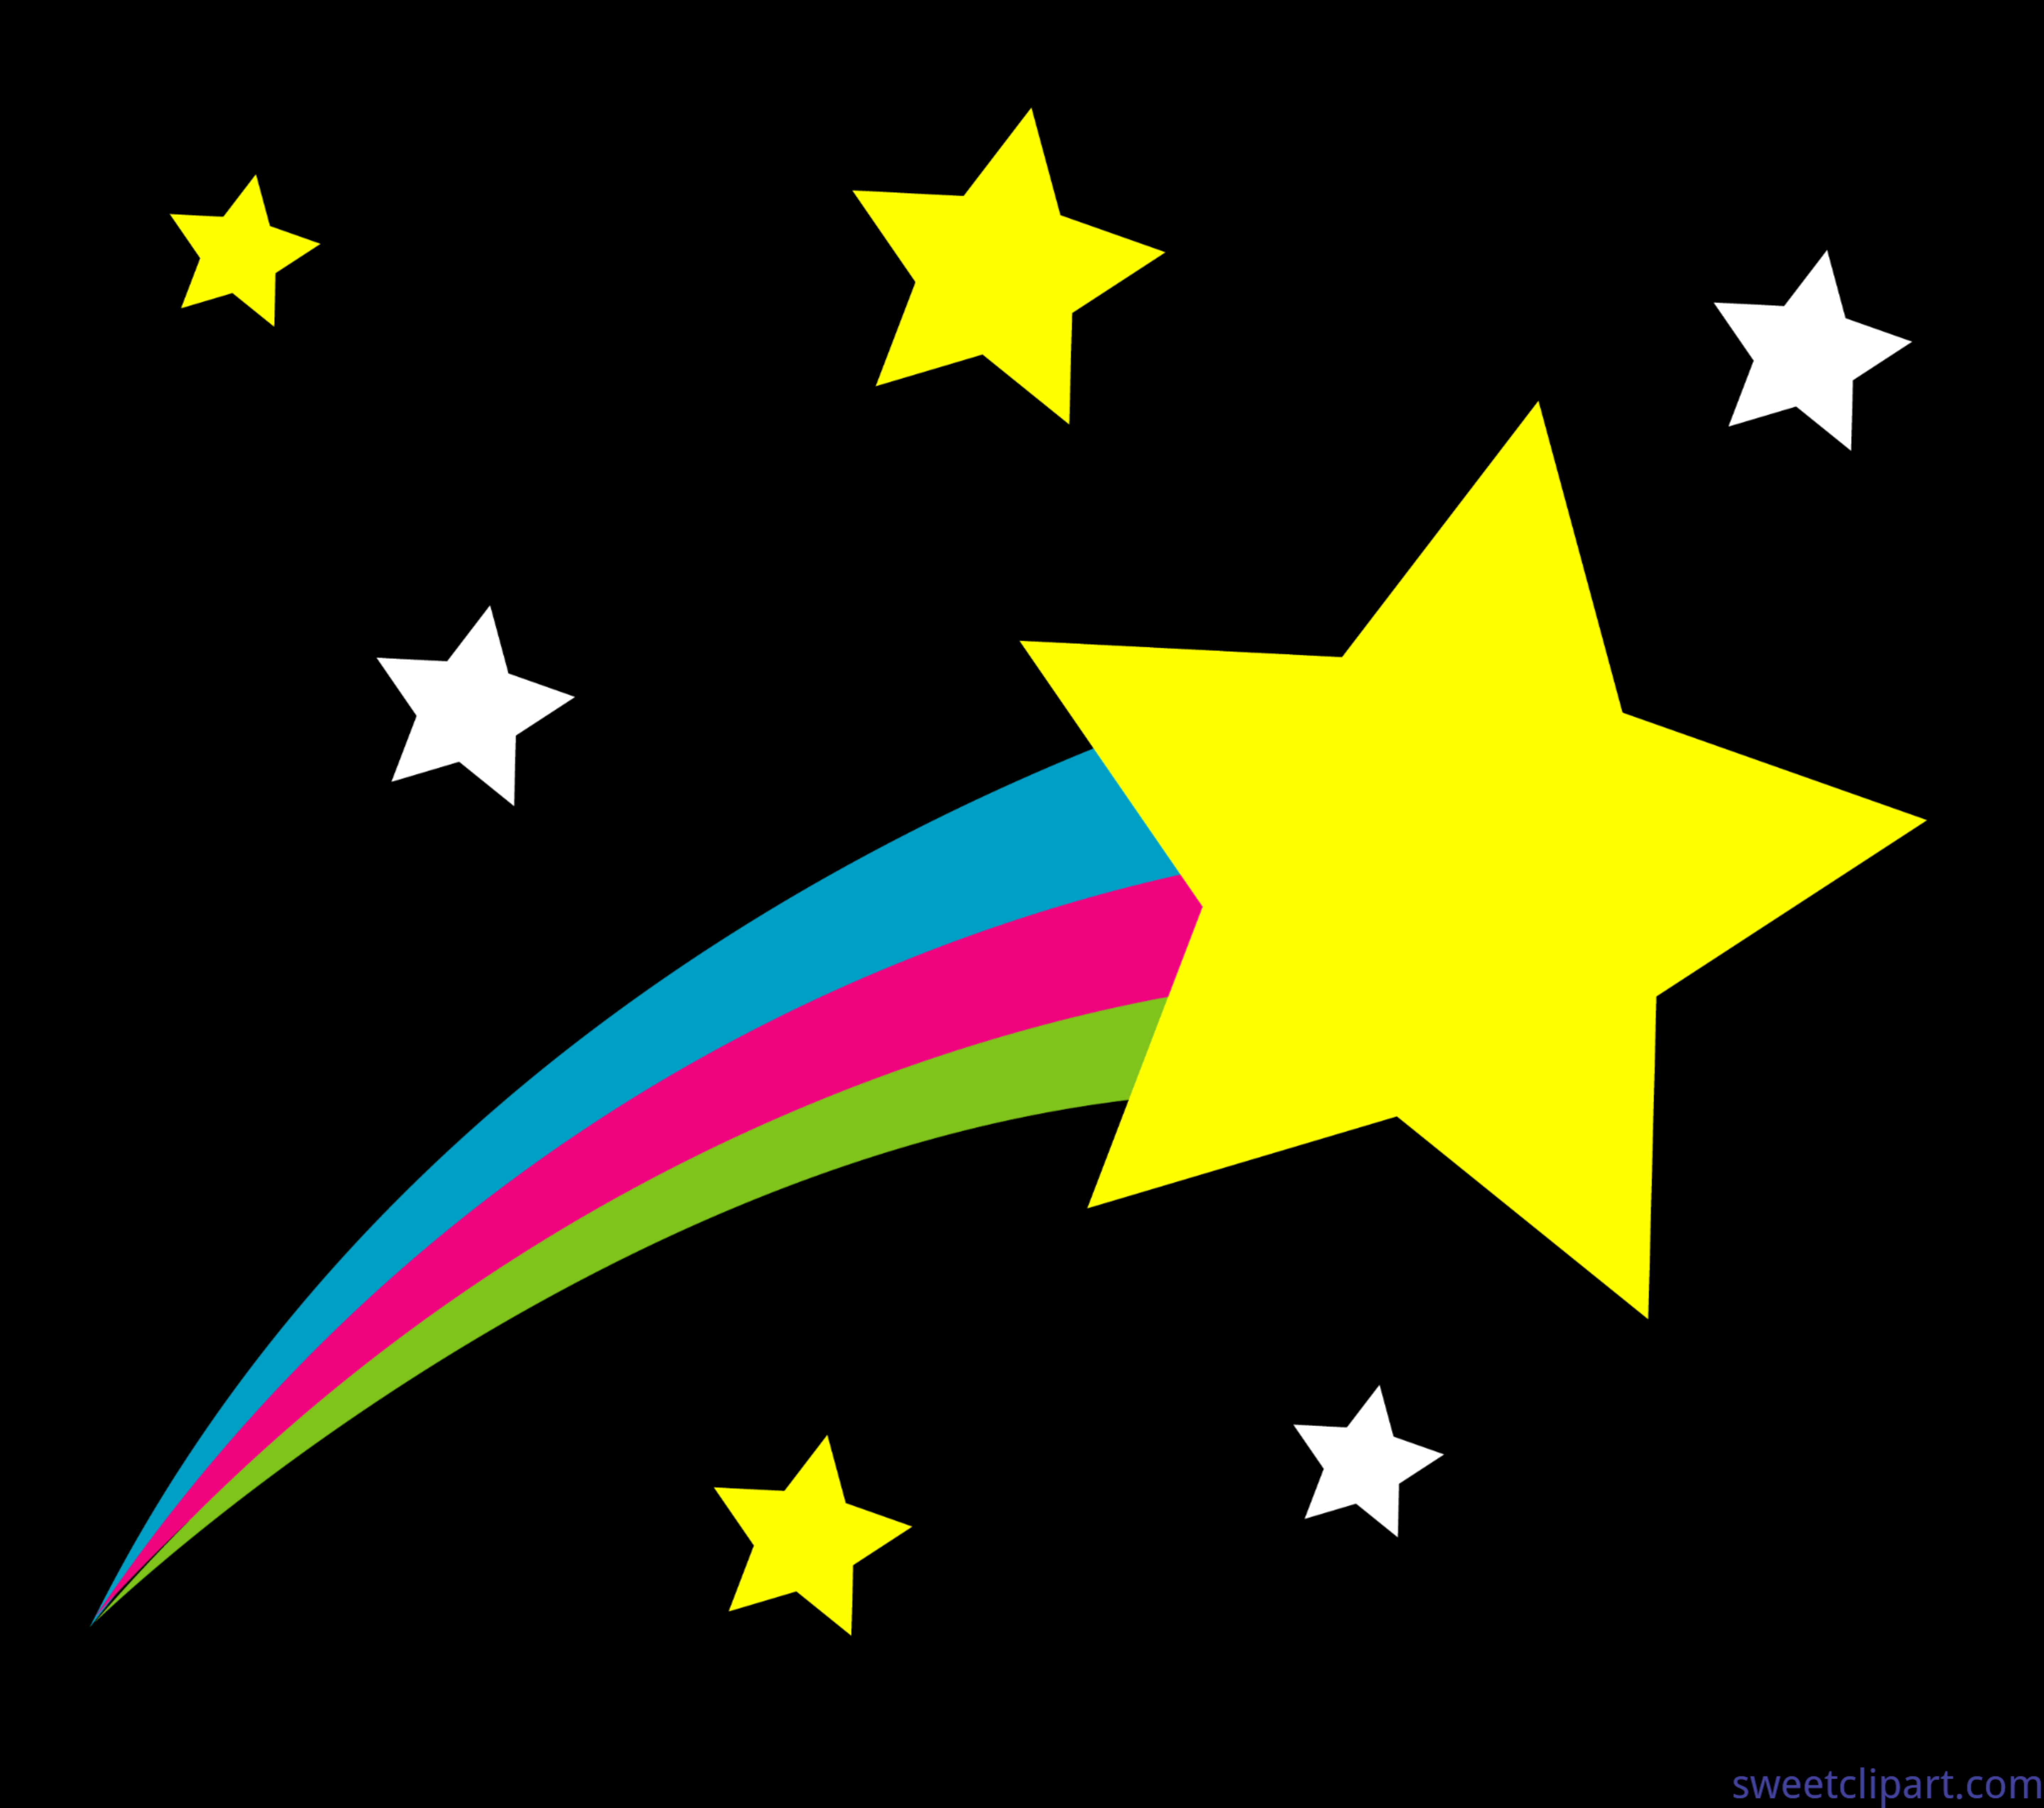 Outer Space Shooting Star Black Background Clip Art.